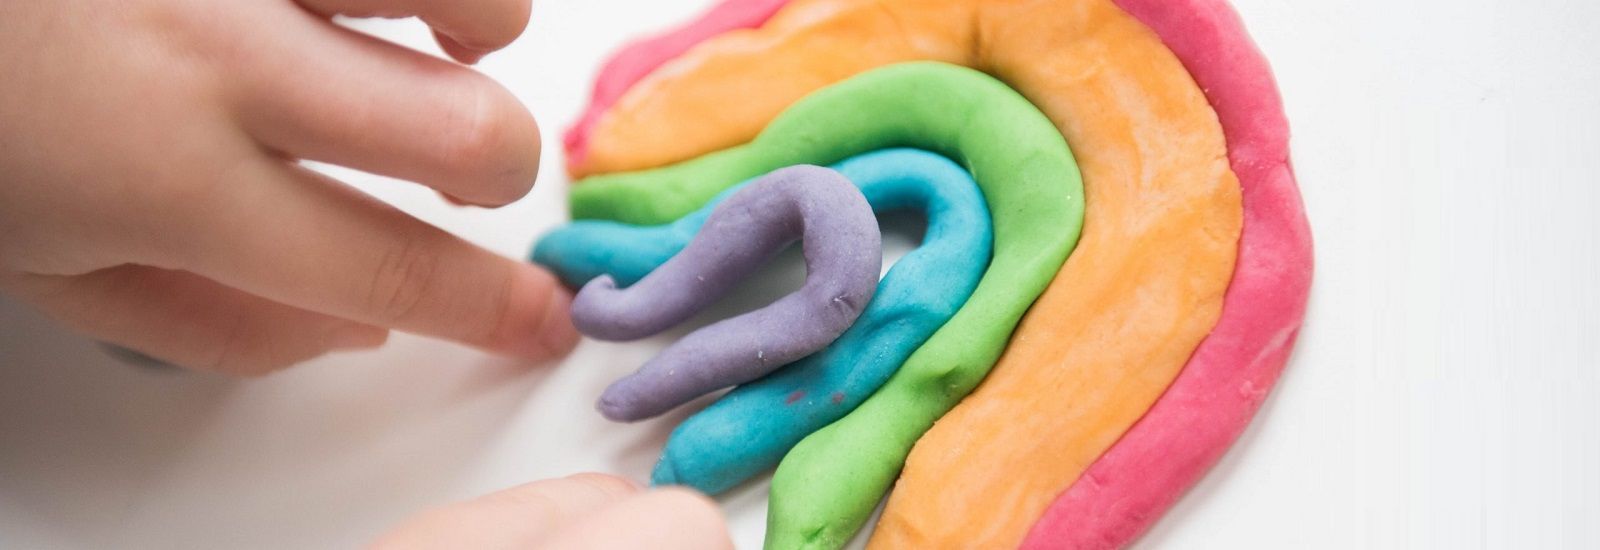 Different colour play doh rolled up forming a rainbow banner image